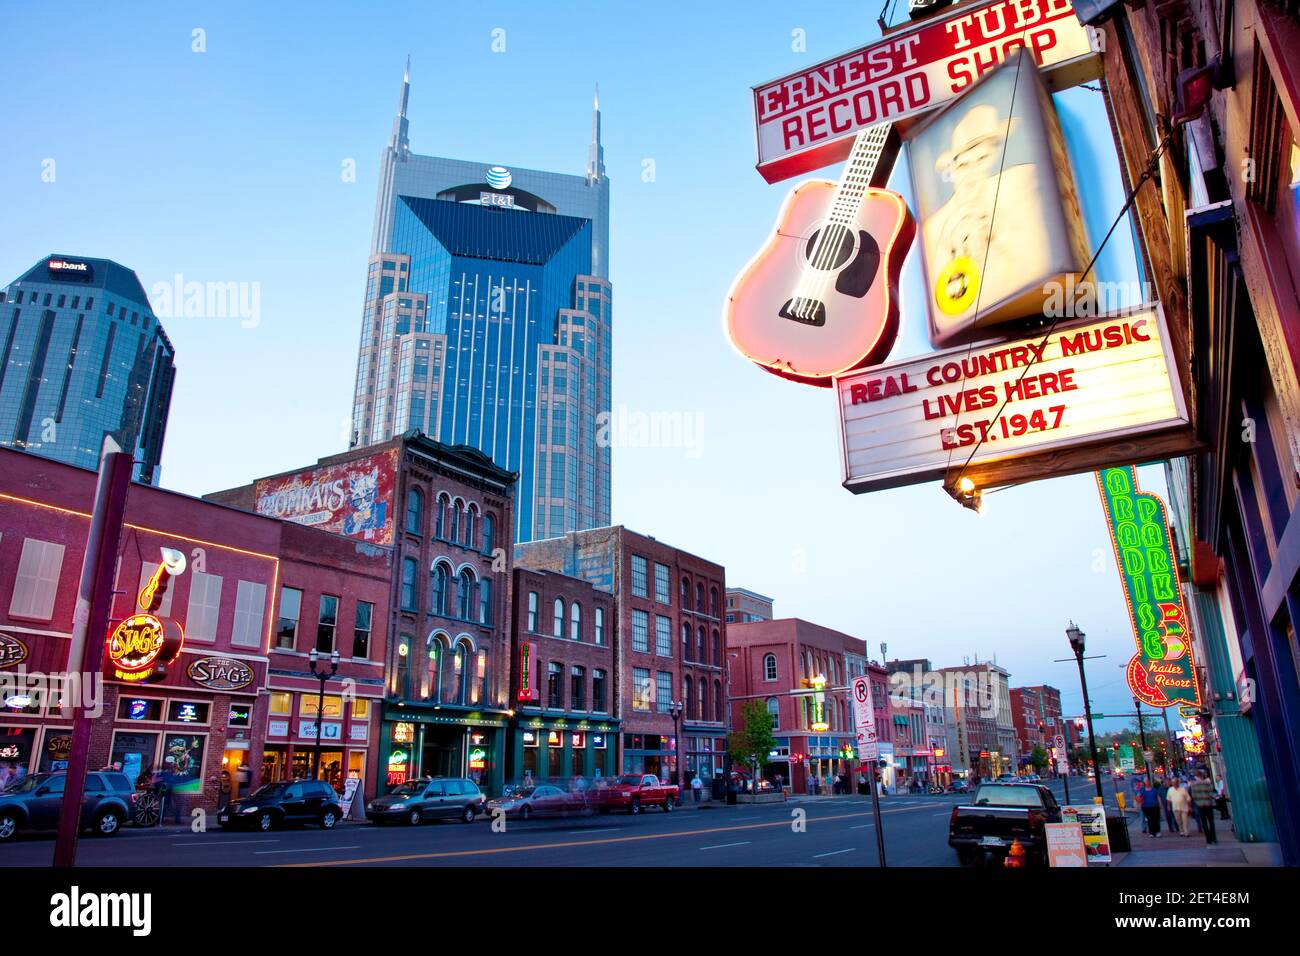 The AT&T building towers over the historic bars and honky-tonks along lower Broadway in Nashville Tennessee USA Stock Photo